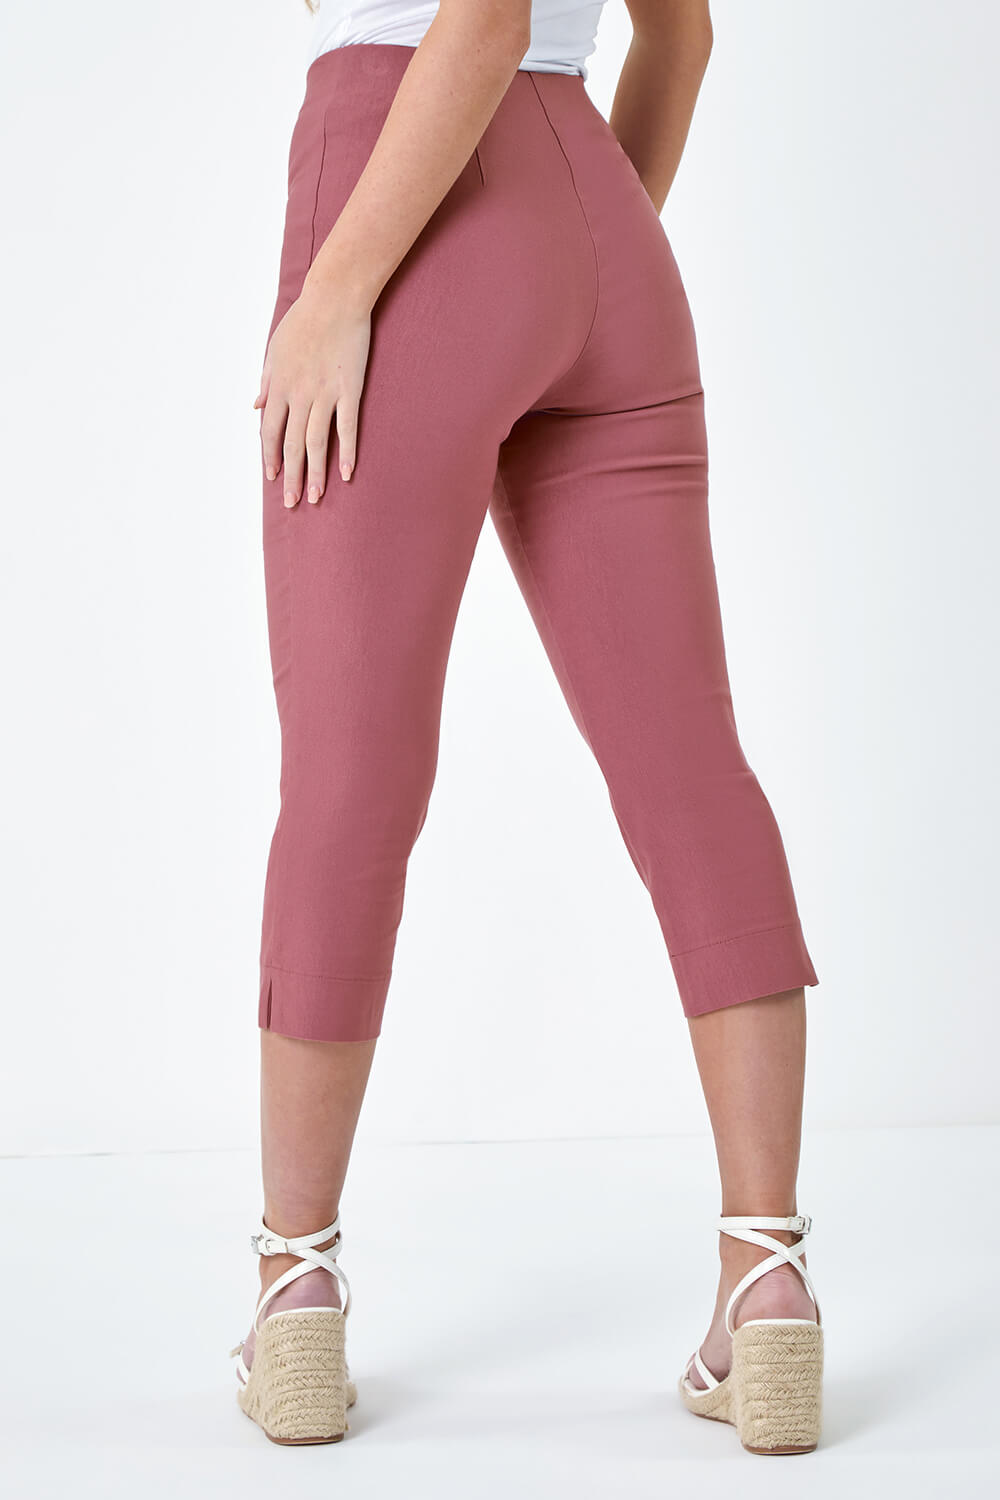 Biscuit Petite Cropped Stretch Trousers, Image 3 of 5